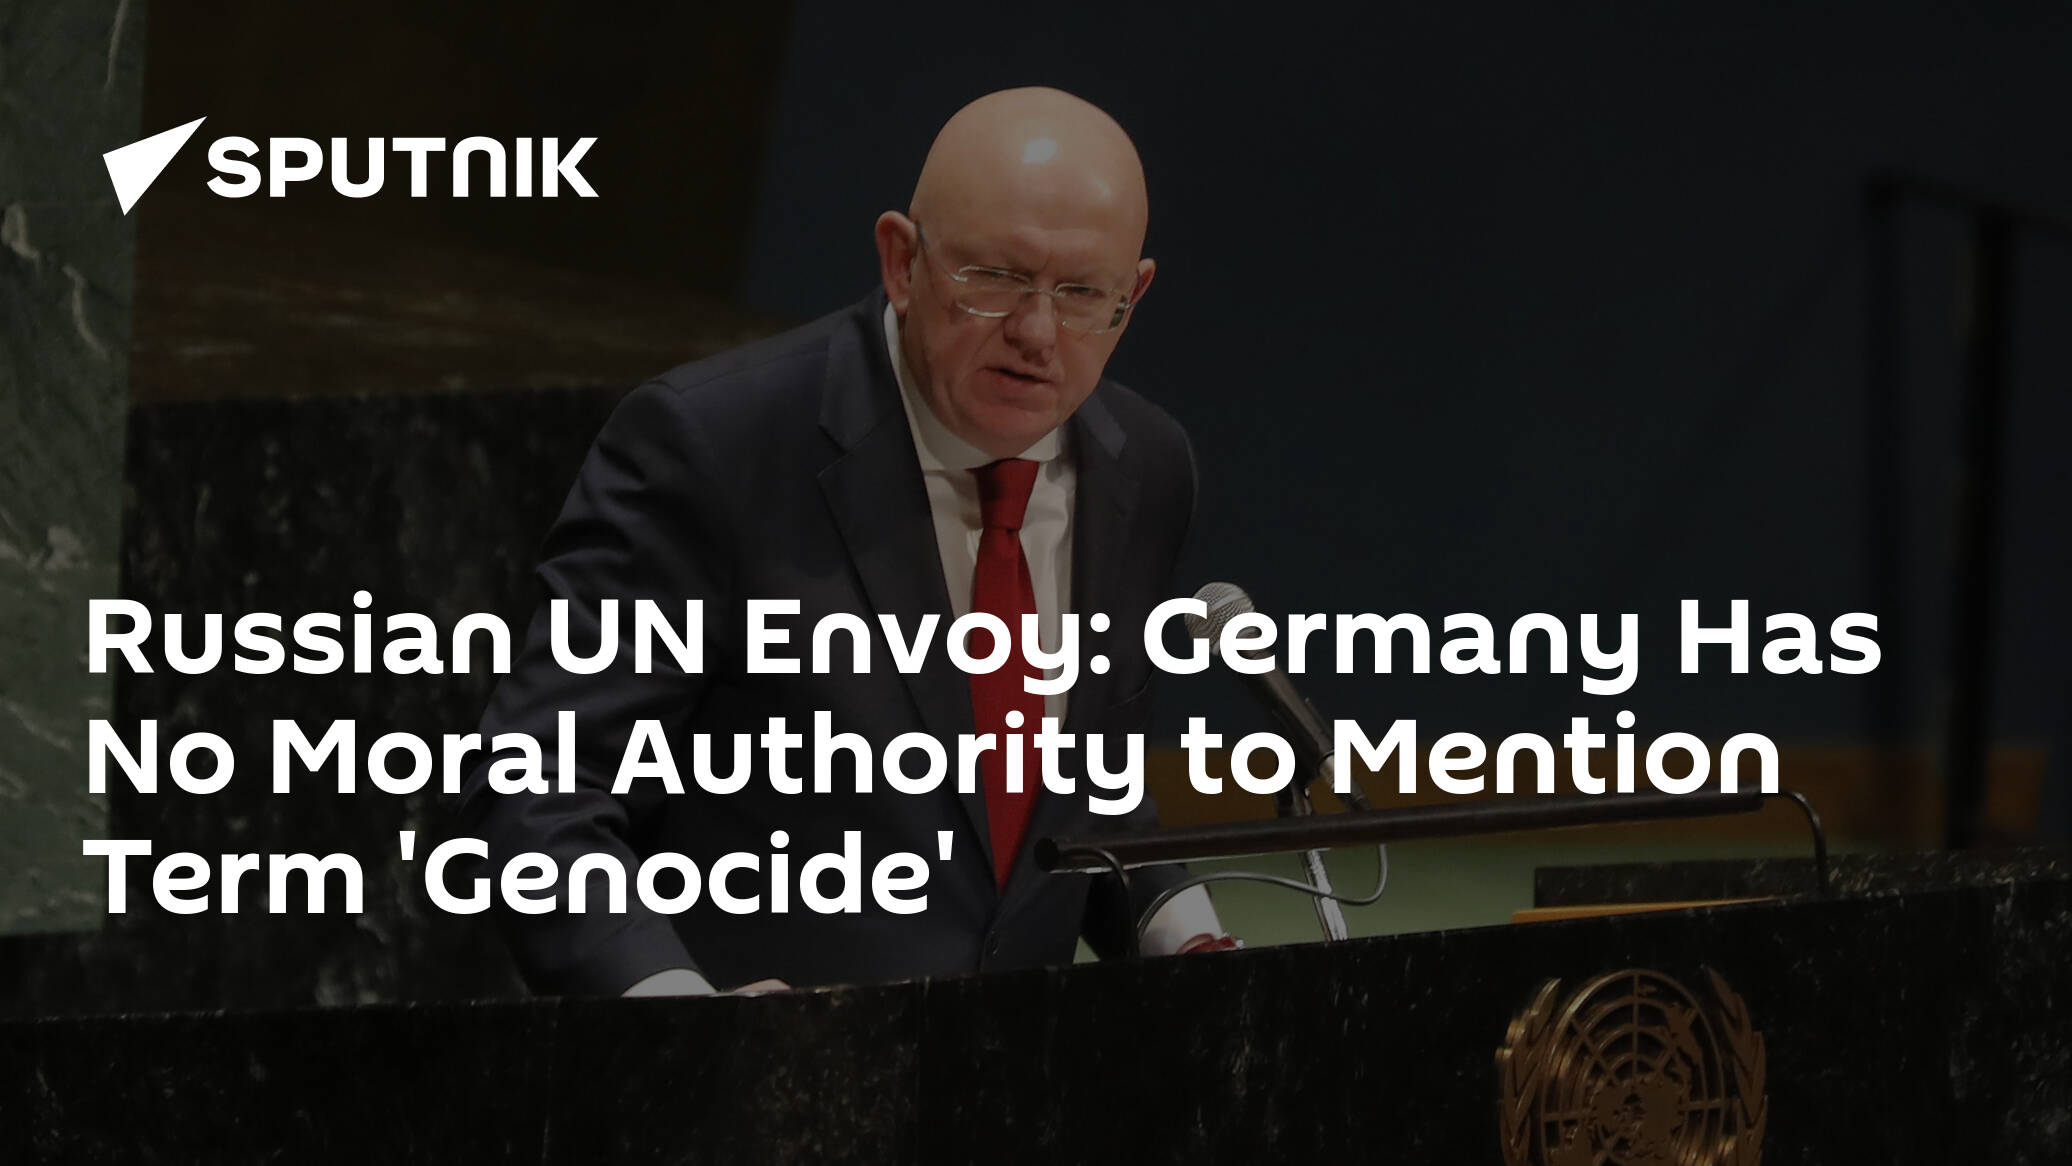 Russian UN Envoy Germany Has No Moral Authority to Mention